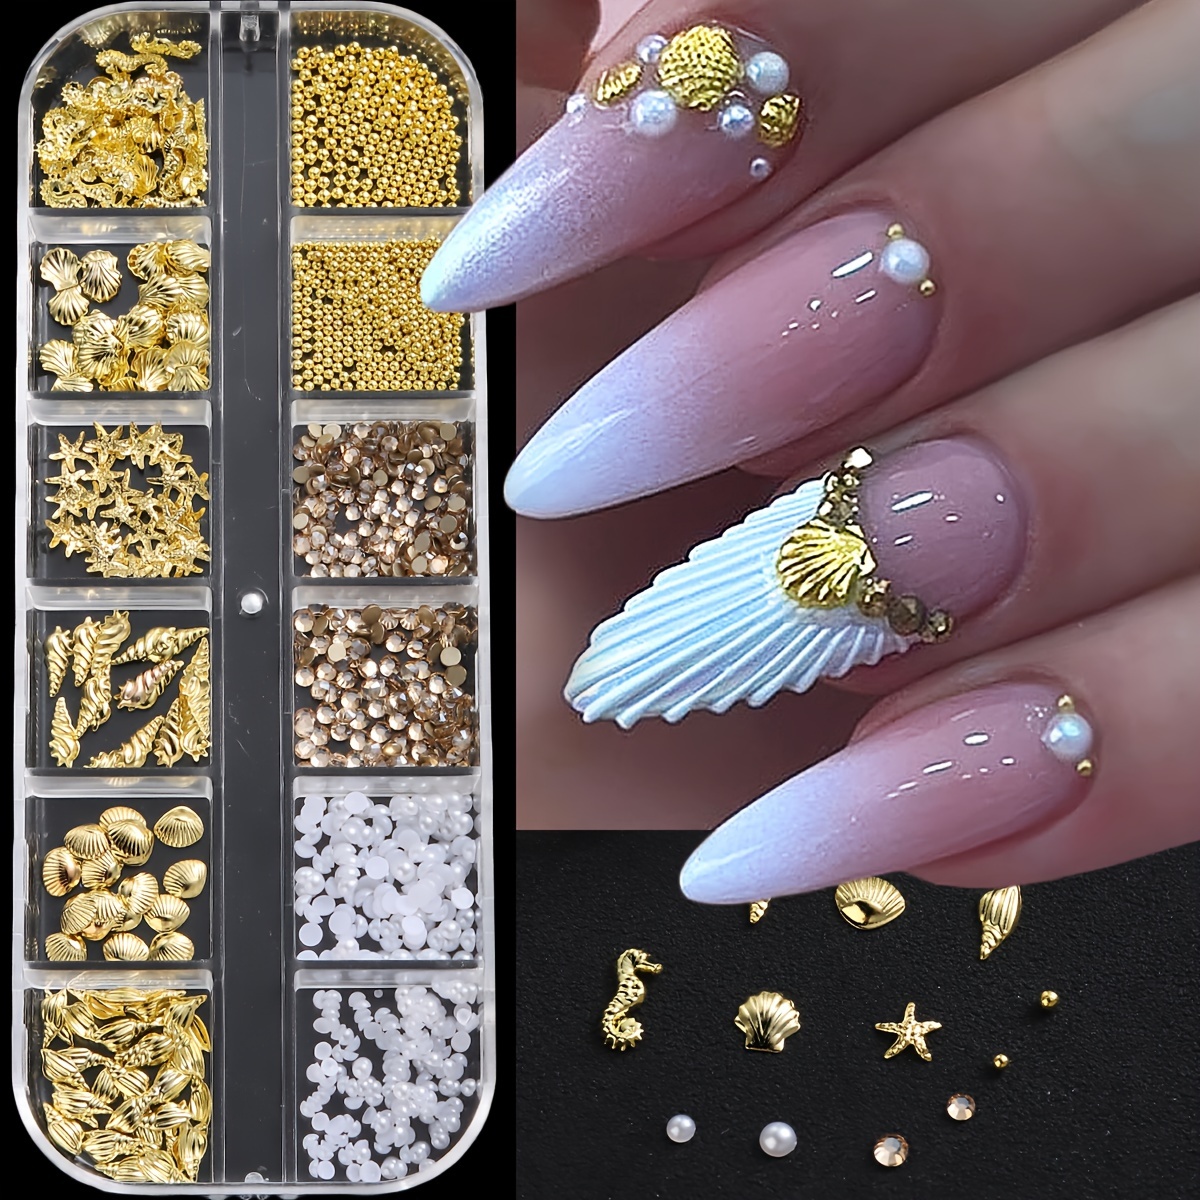 

Ocean-inspired Nail Art Charms - 6/12 Grid Set With Alloy Shell, Abalone, Seahorse, Starfish, Conch & Pearl Beads For Diy Manicure